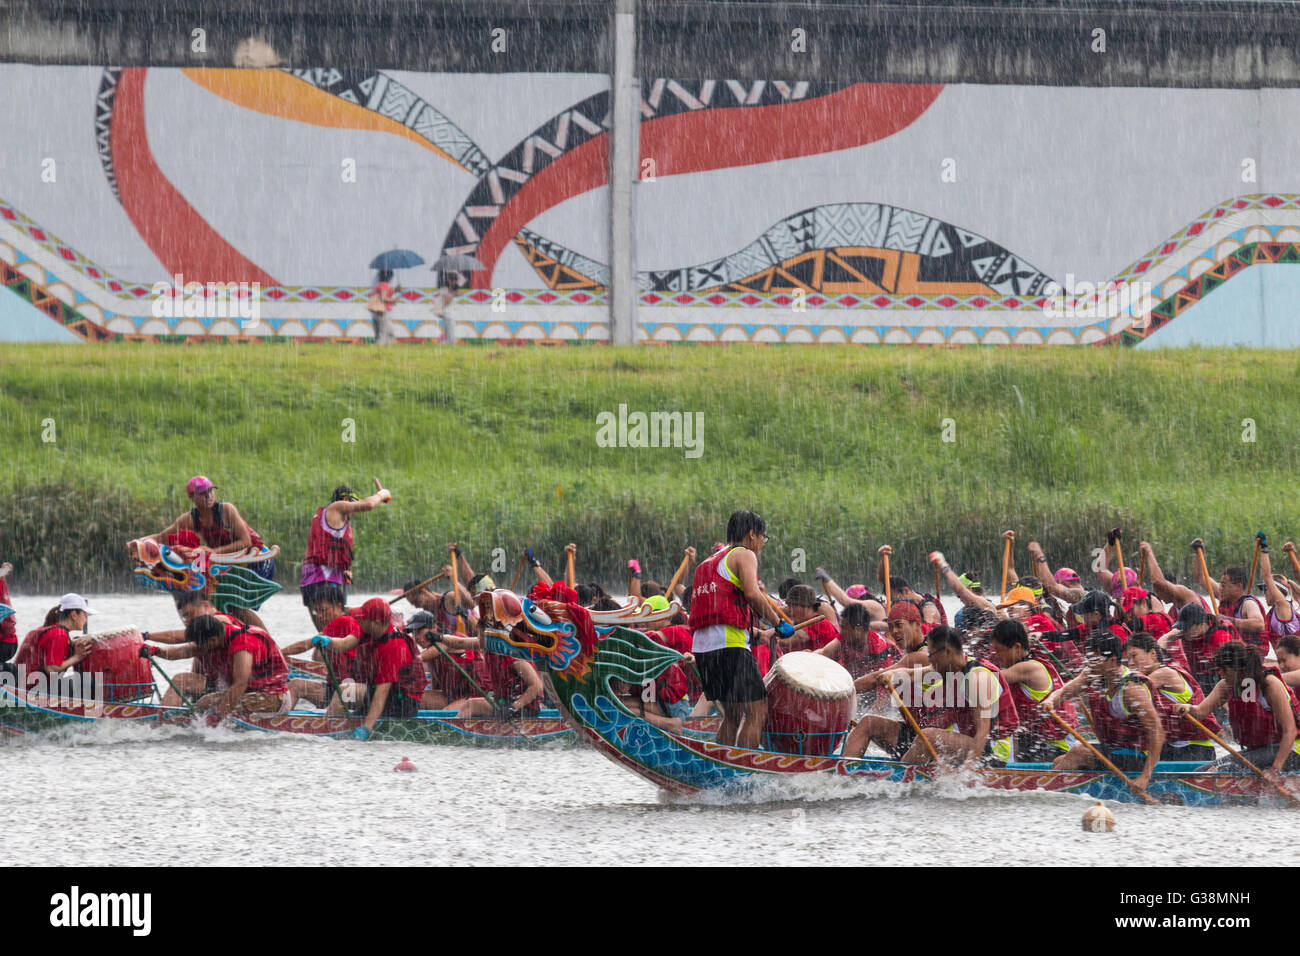 Drummers beat out the rhythm for their crews during the annual dragon boat races that took place in heavy rain on Duanwu Festival, better known as Dragon Boat Festival. Stock Photo